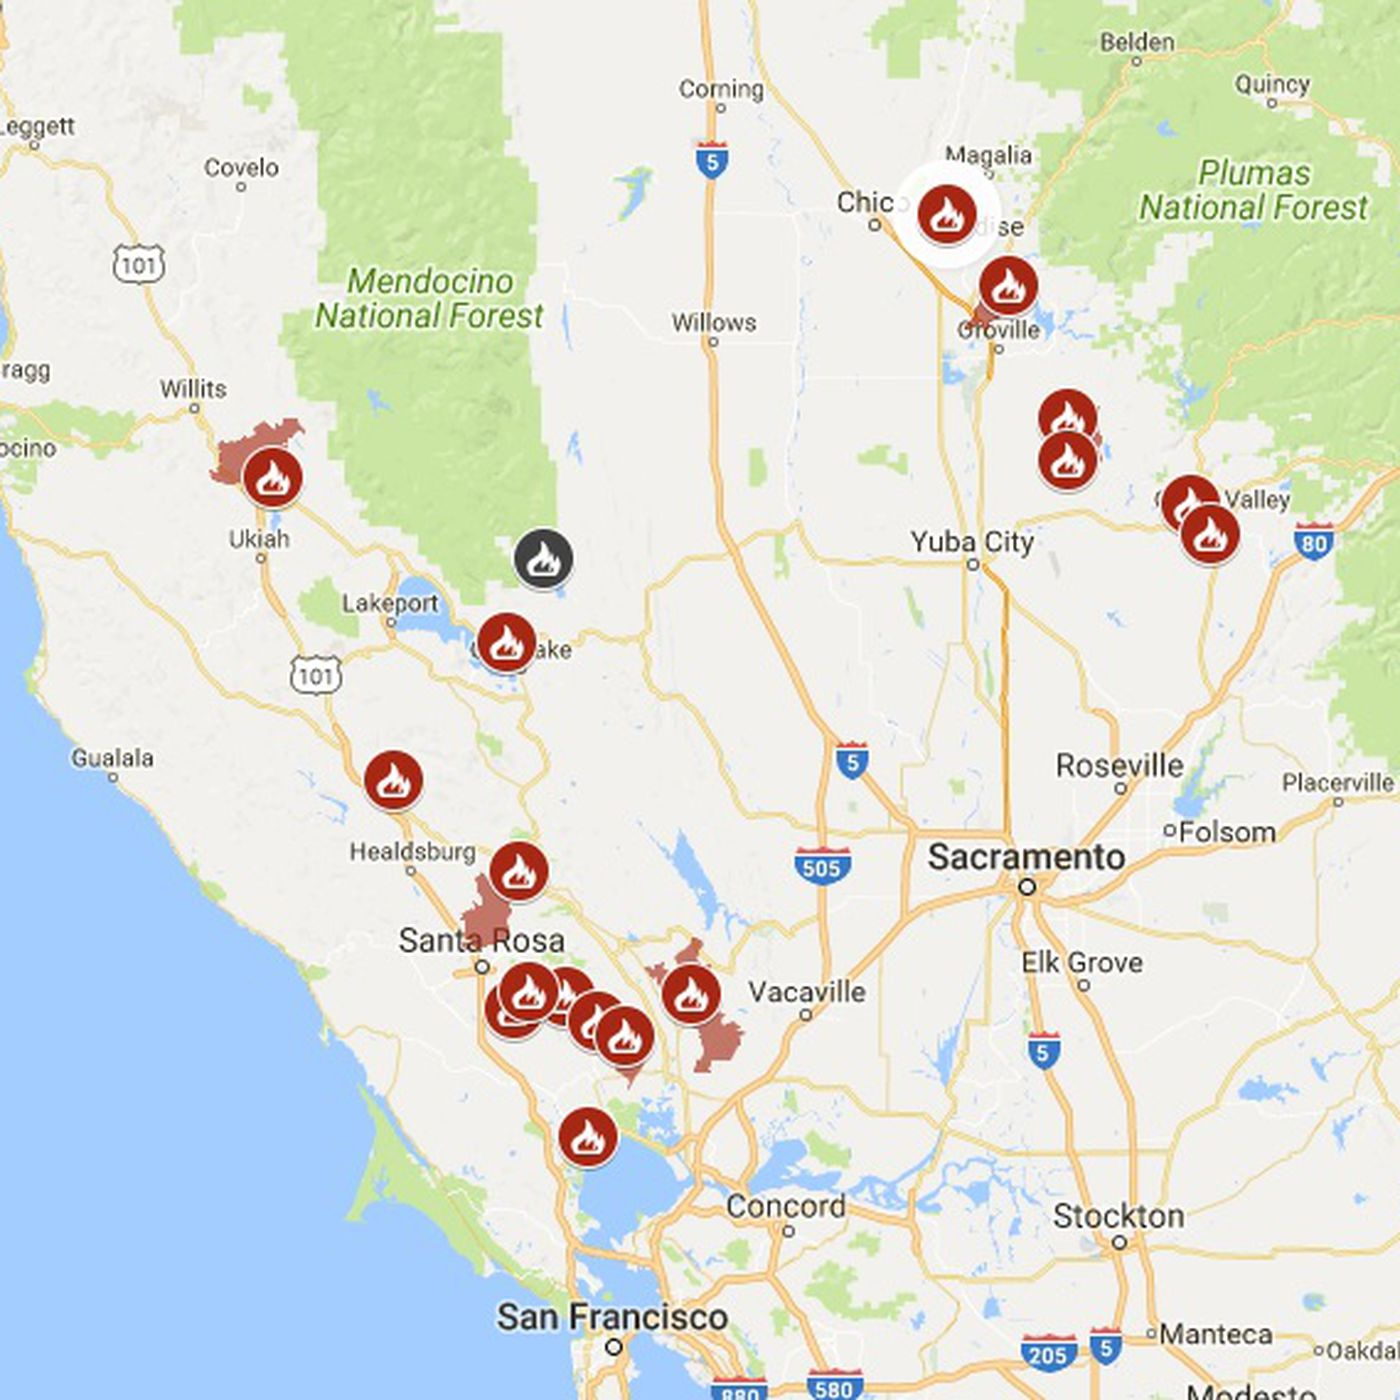 Mapt Download Maps California Fire Map Google - Klipy - California Fire Map Google